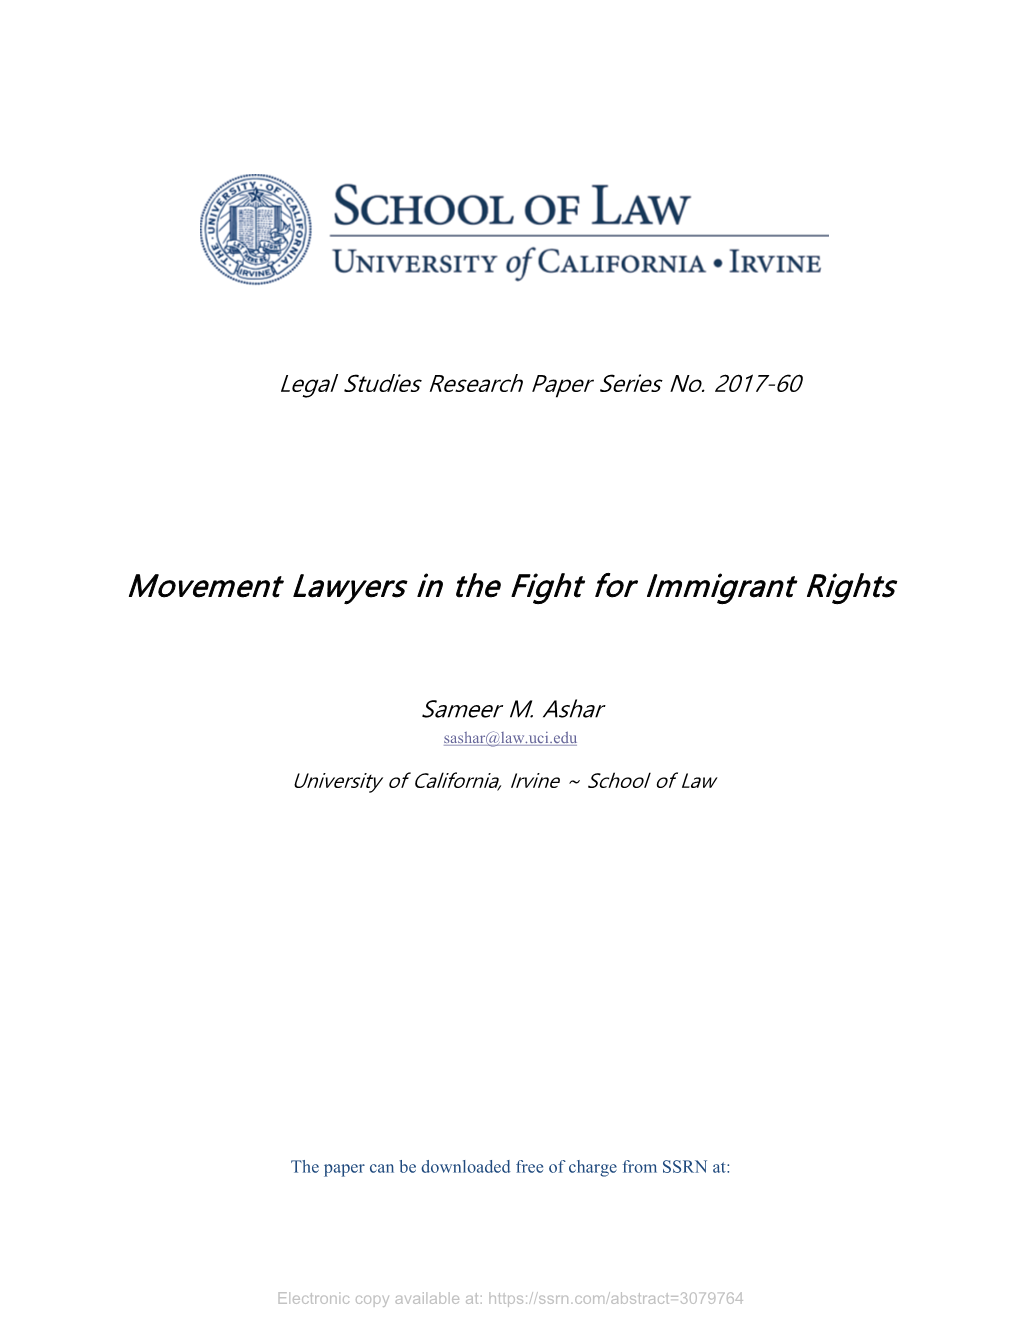 Movement Lawyers in the Fight for Immigrant Rights